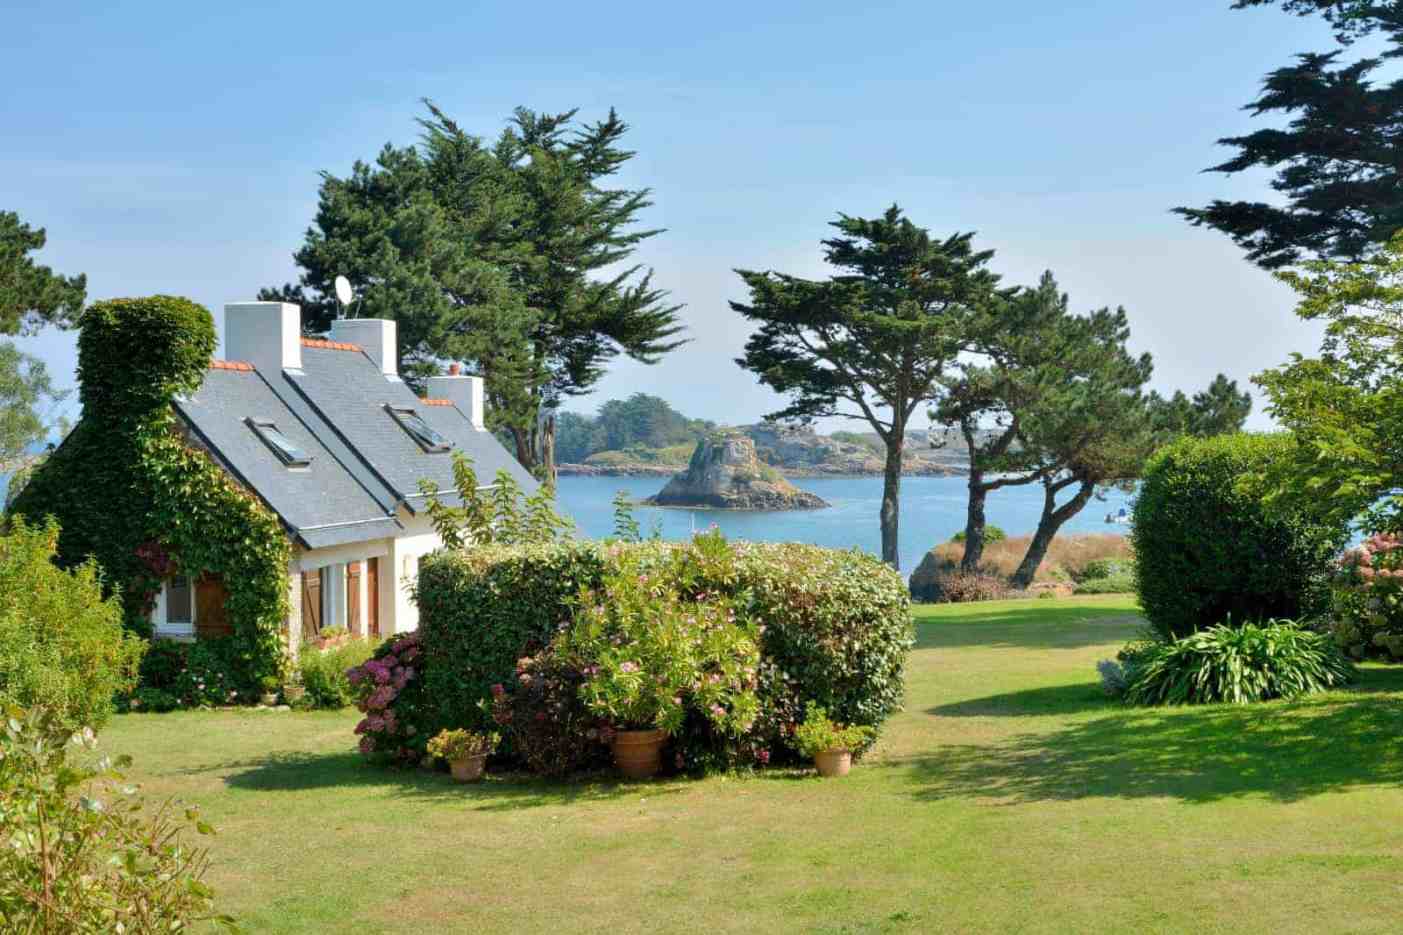 Retire to France - affordable property